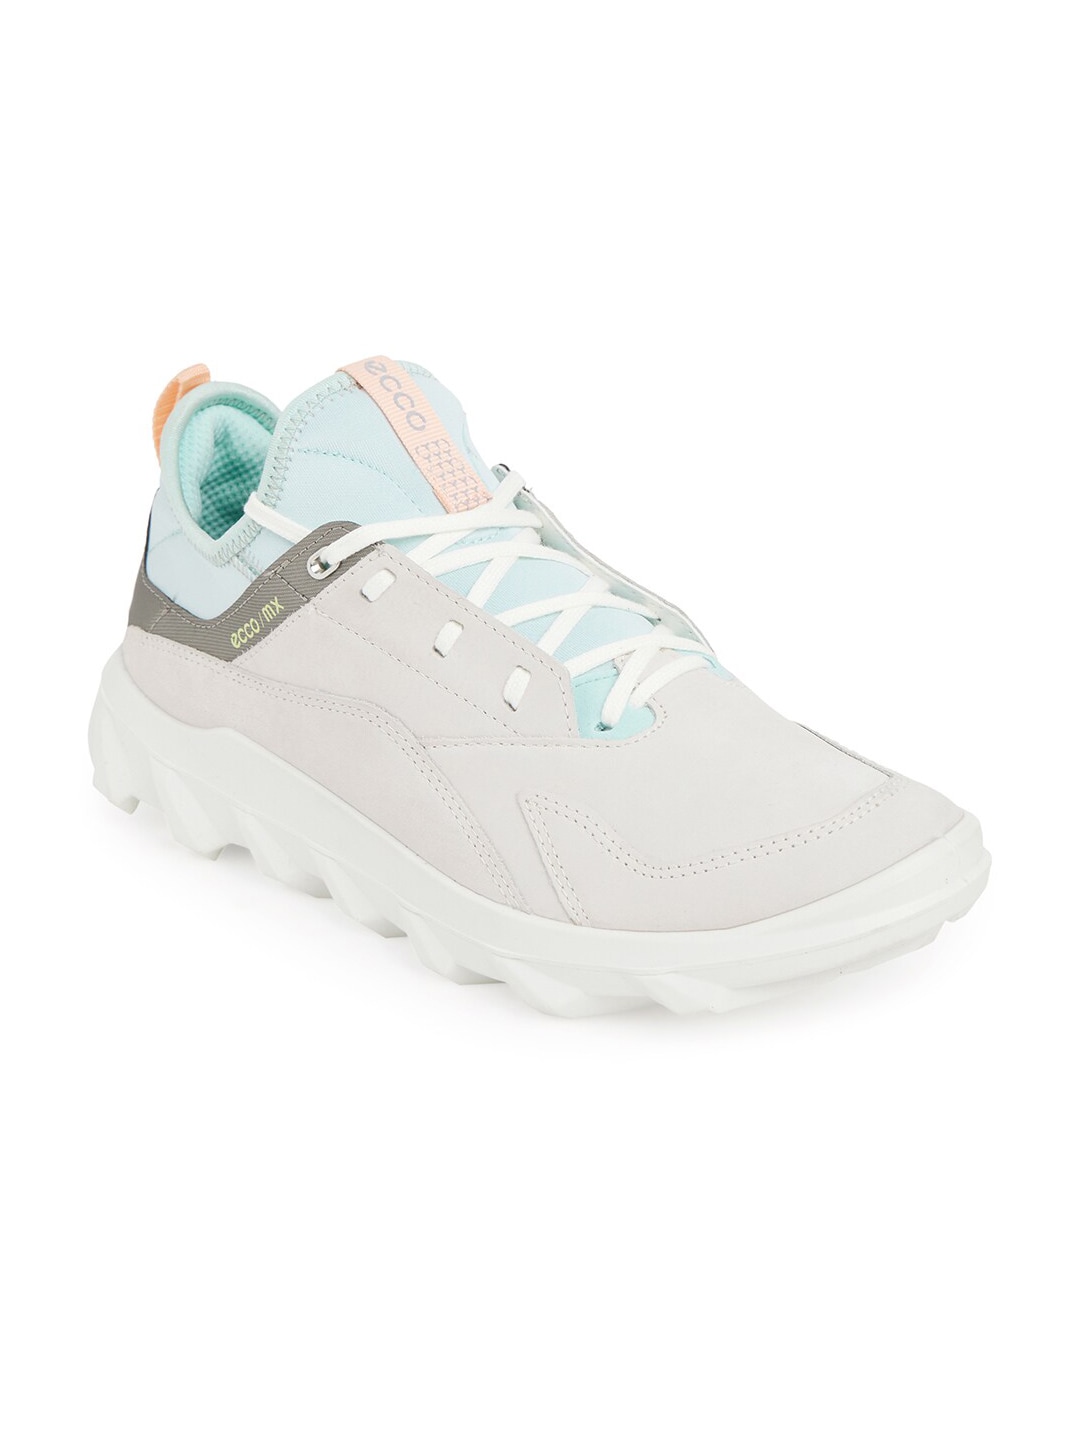 ECCO Women White Vitality Leather Walking Non-Marking Shoes Price in India